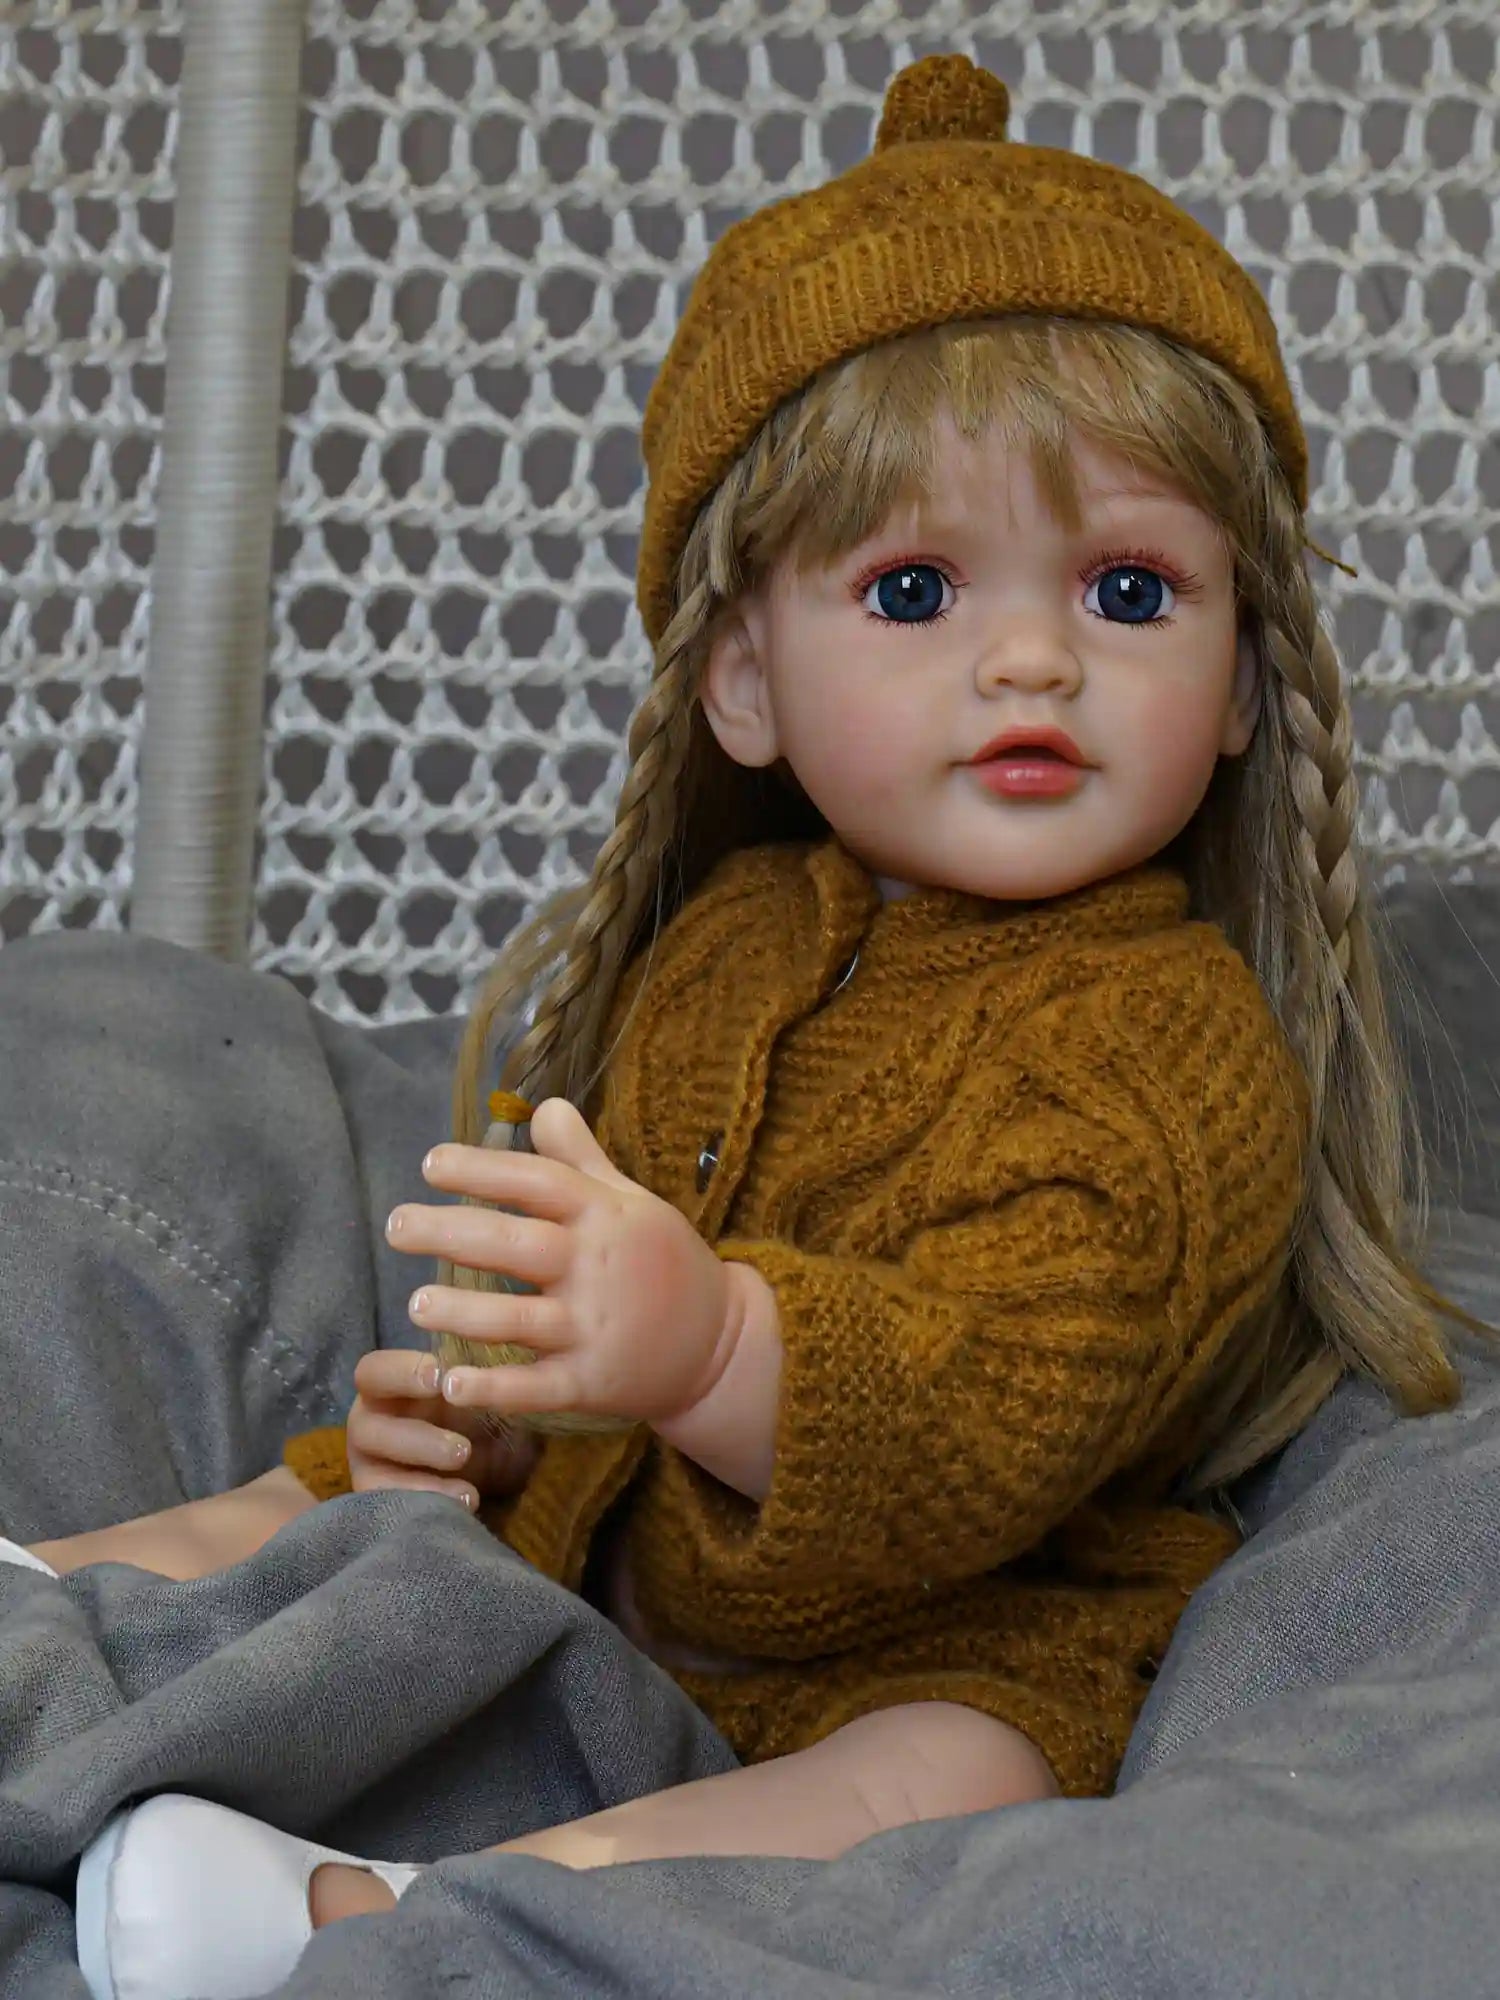 Seated reborn doll with blue eyes and a soft braided hairstyle, wearing a hand-knitted mustard sweater and cap, against a handcrafted grey backdrop.